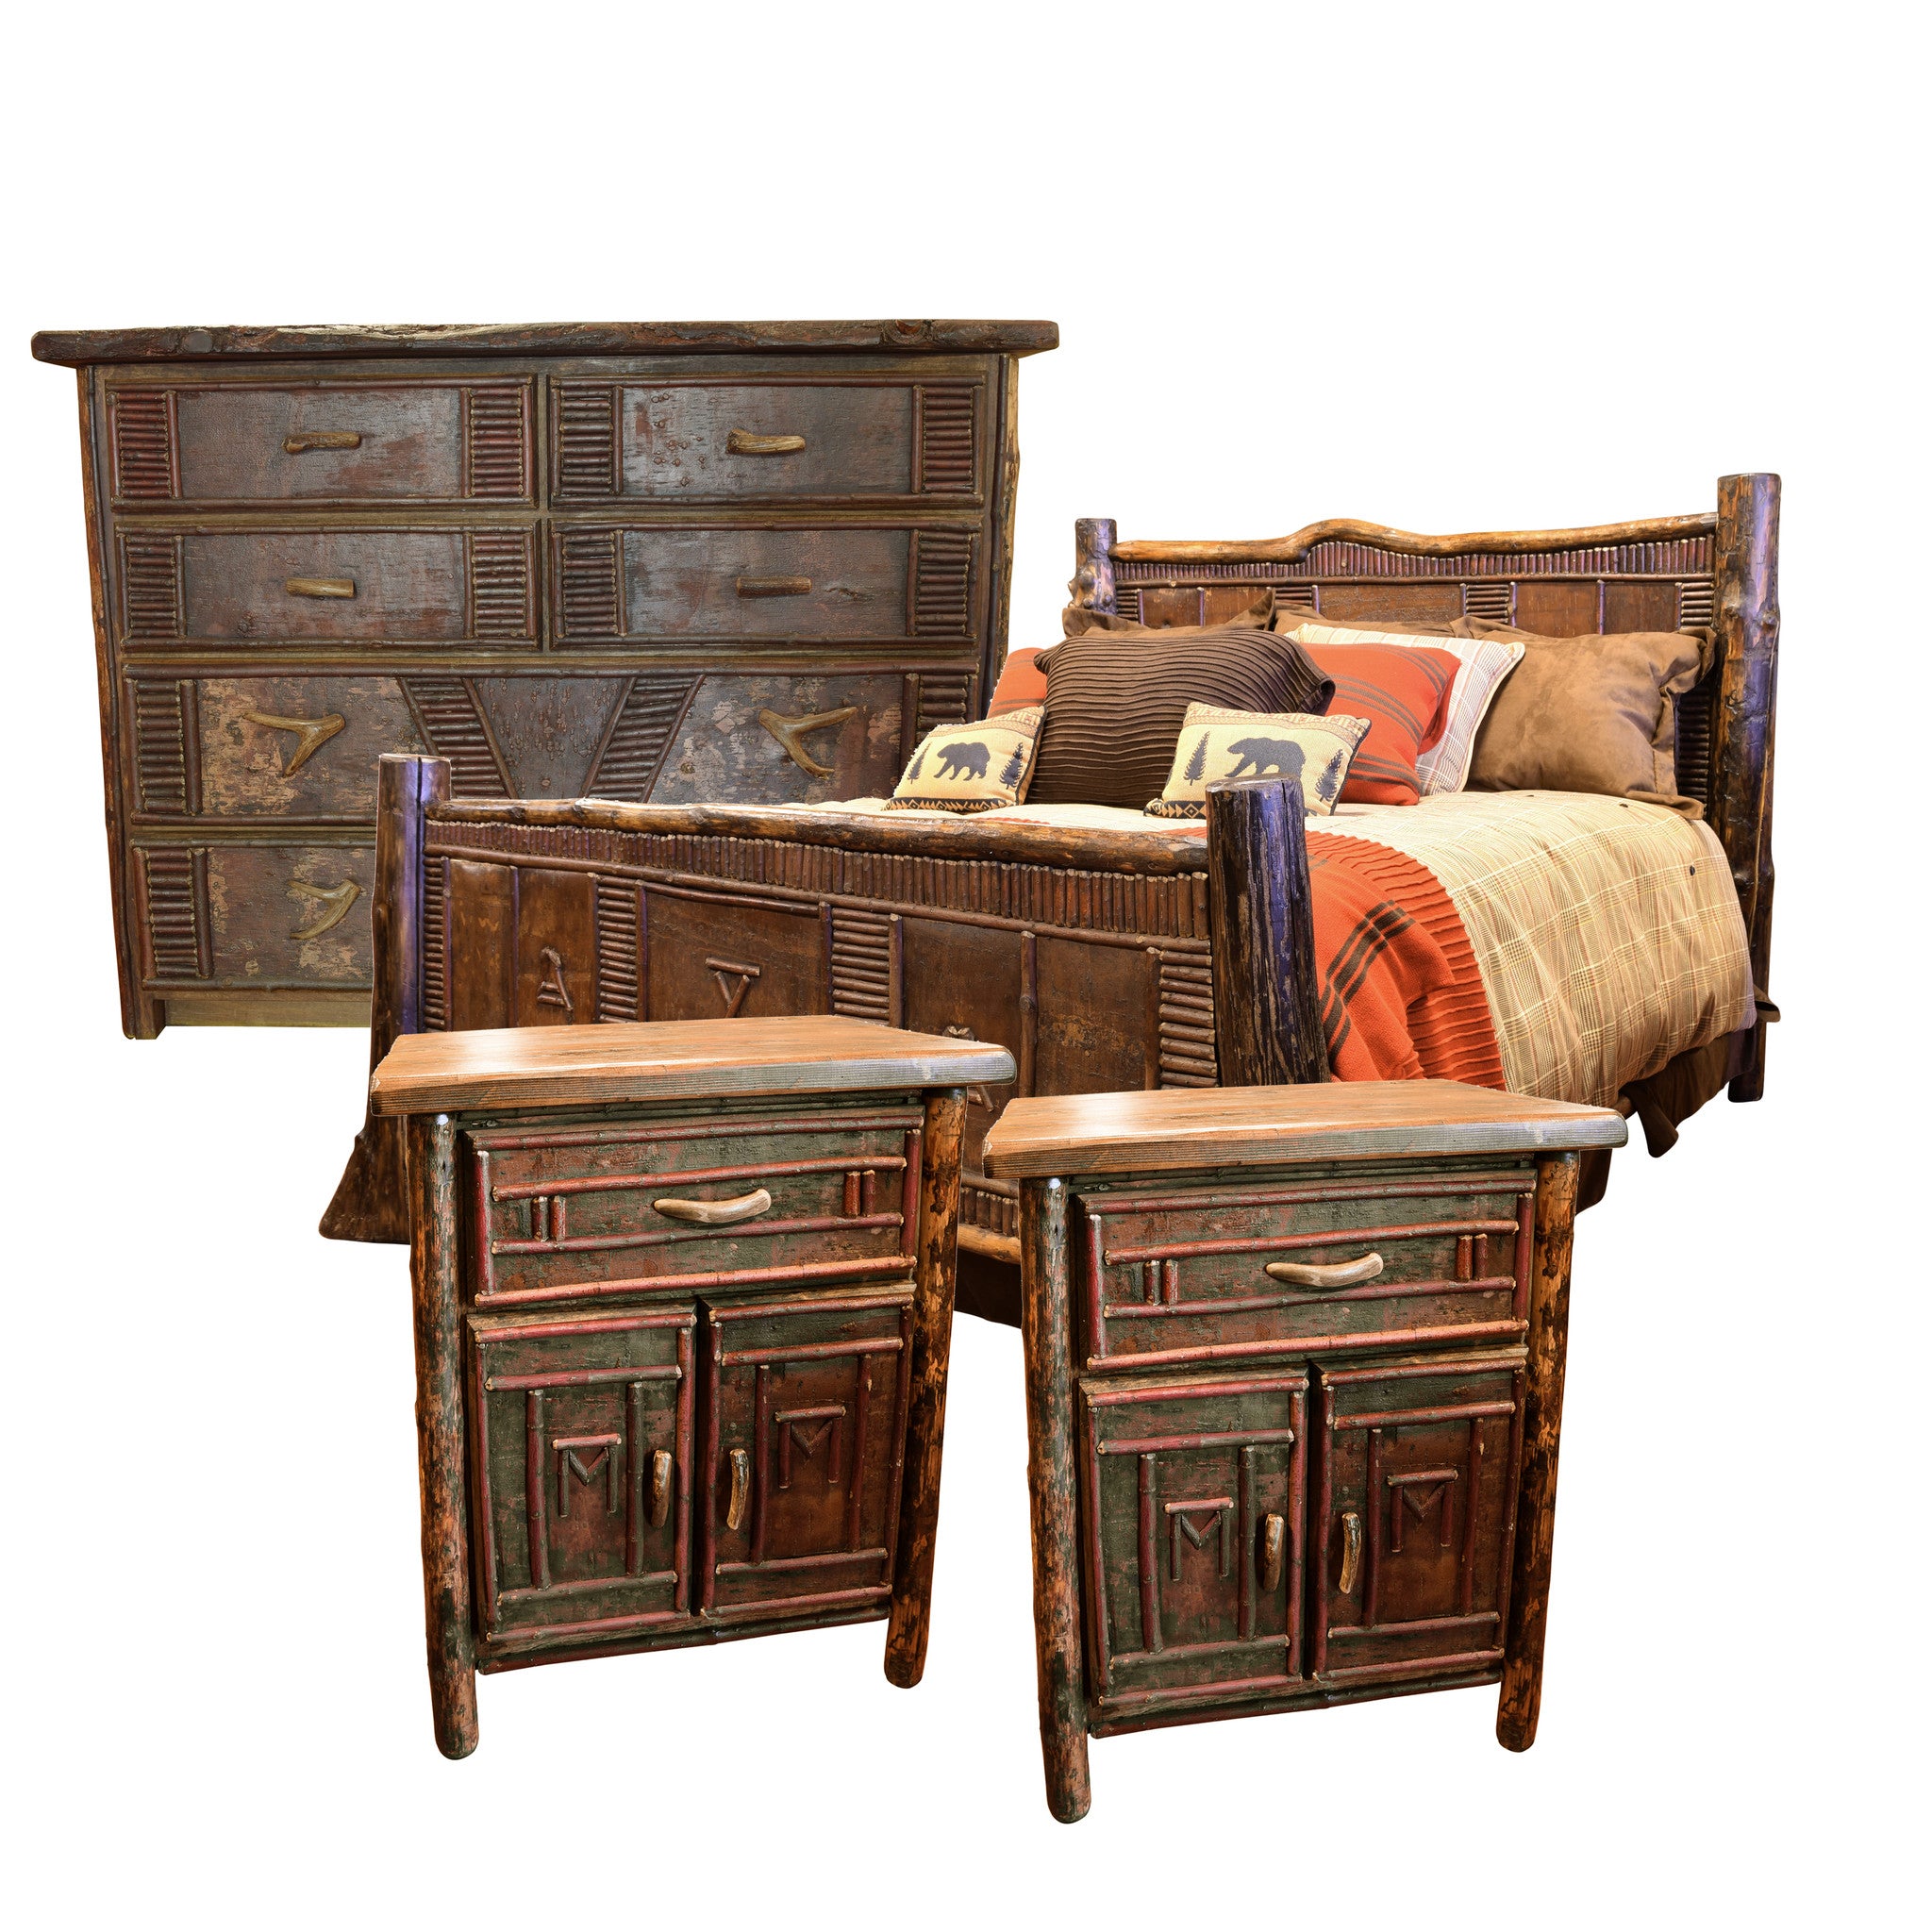 Four Piece California King Size Bedroom Set, Furnishings, Furniture, Bed